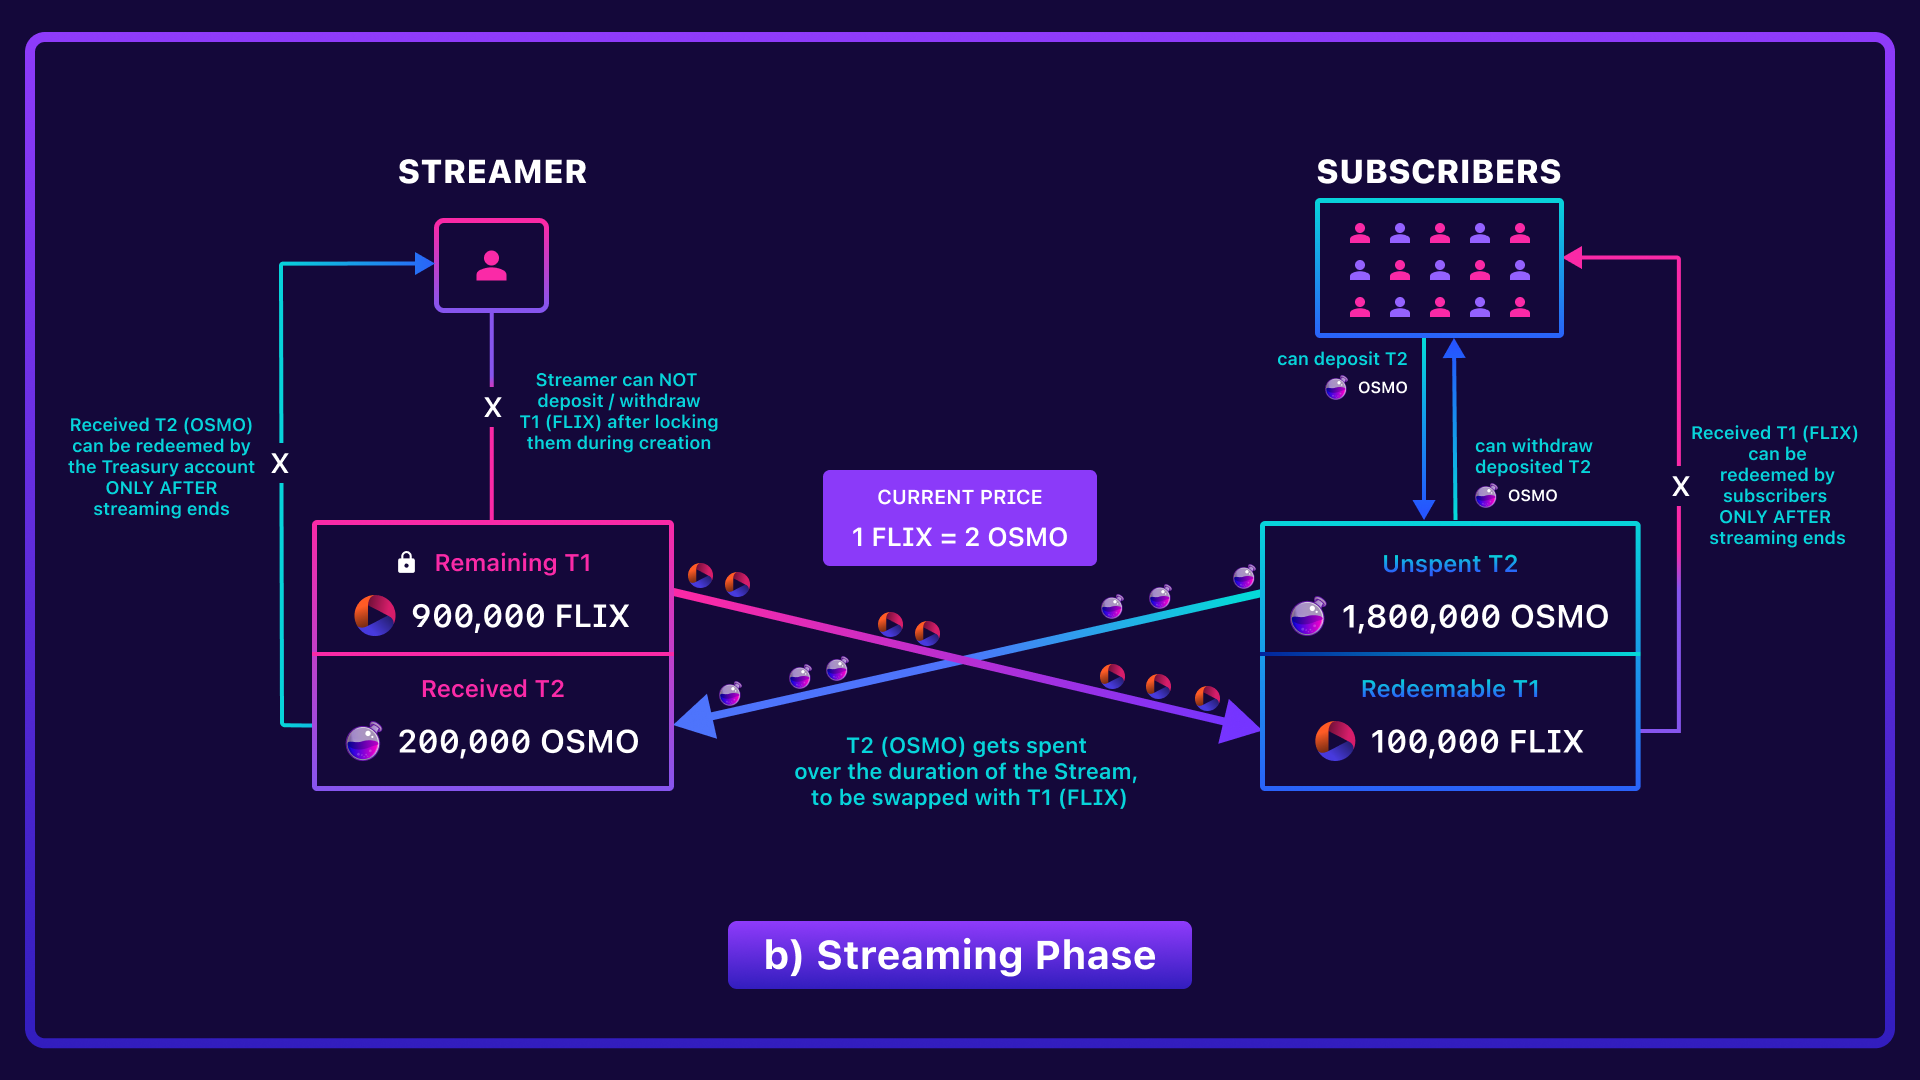 Streaming Phase when tokens are being swapped every second. In the above example, 100K FLIX are streamed (Redeemable T1) for 200K OSMO (Received T2)